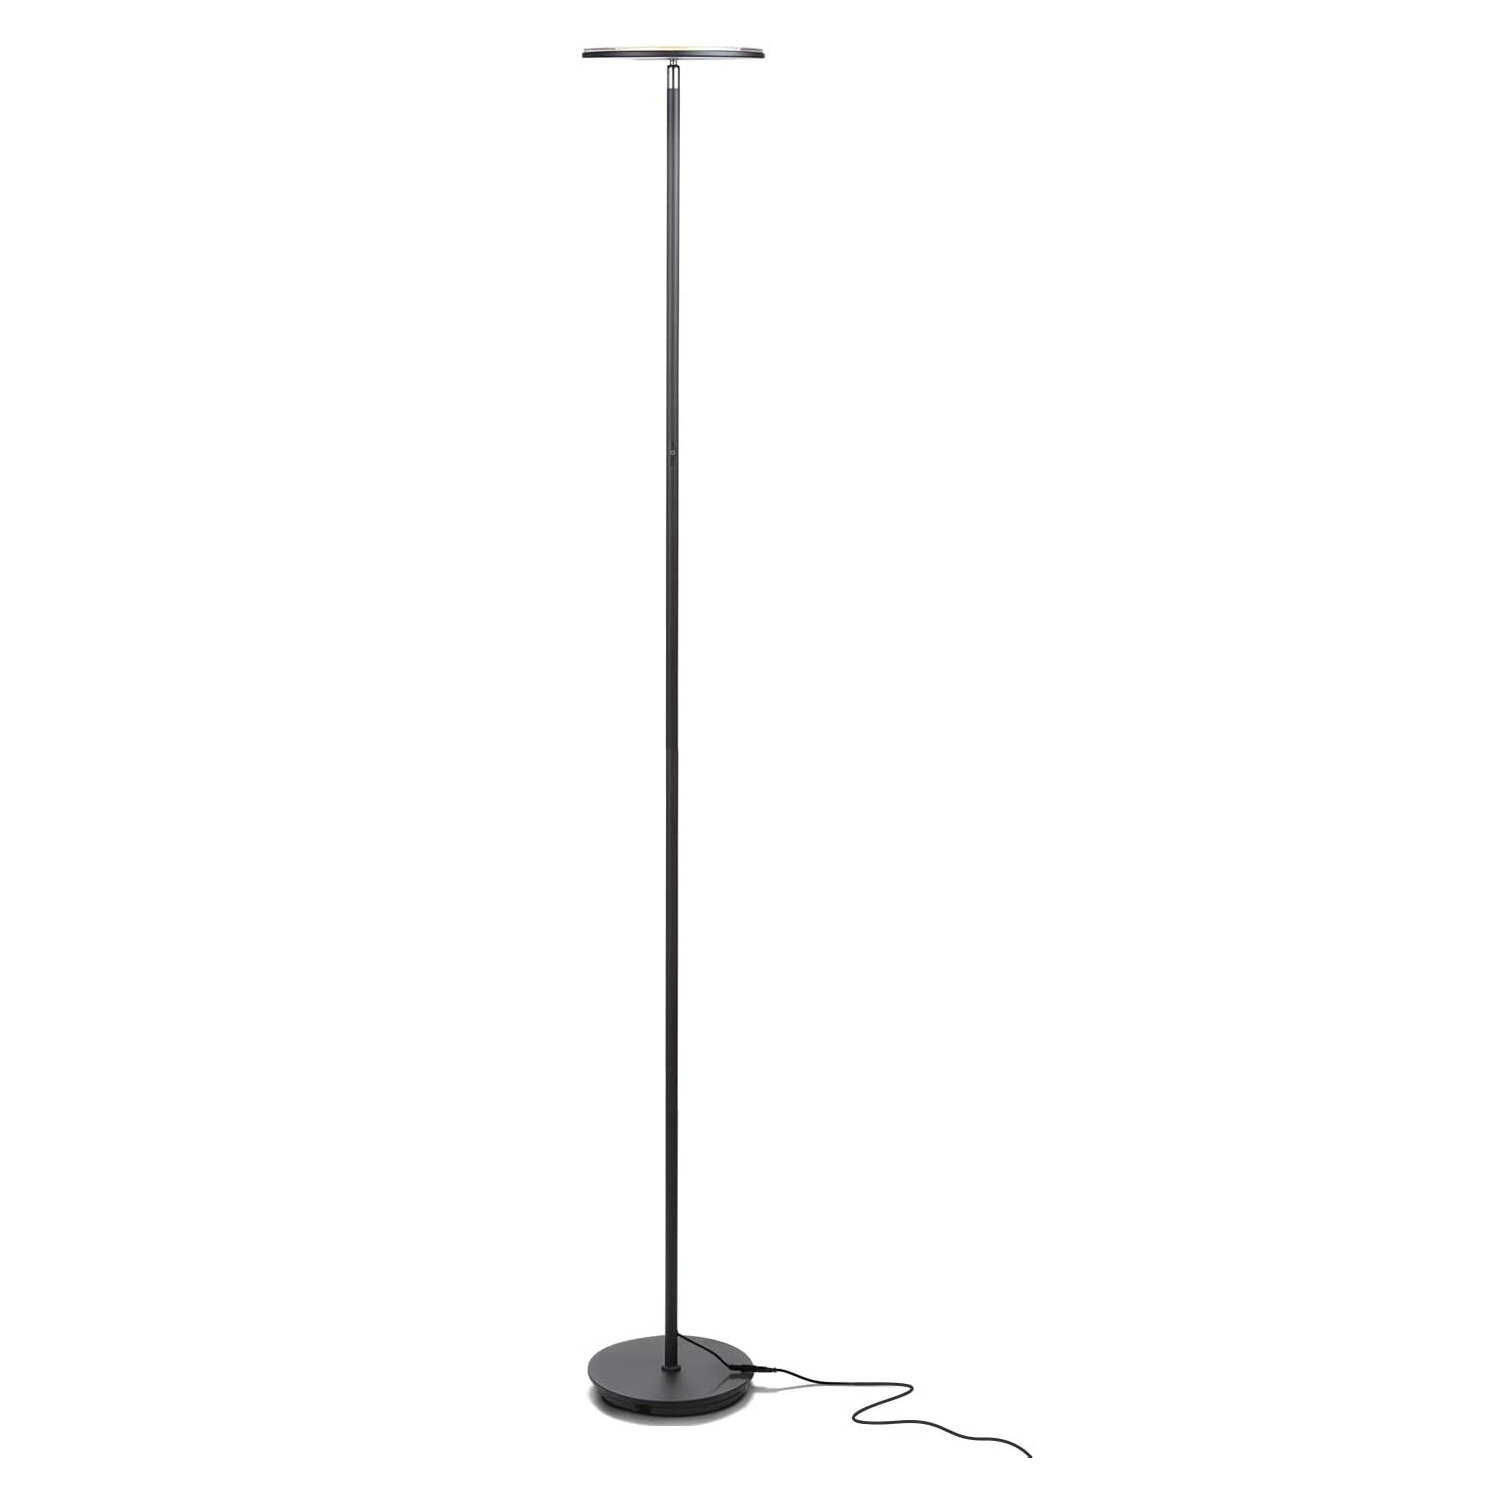 Brightech Halo Flippable LED Torchiere Super Bright Floor Lamp Dimmable Uplight for Reading Books in Your Bedroom etc Tall Standing Modern Pole Light for Living Rooms & Offices Black BT-FL-HALO-JT-BLCK 